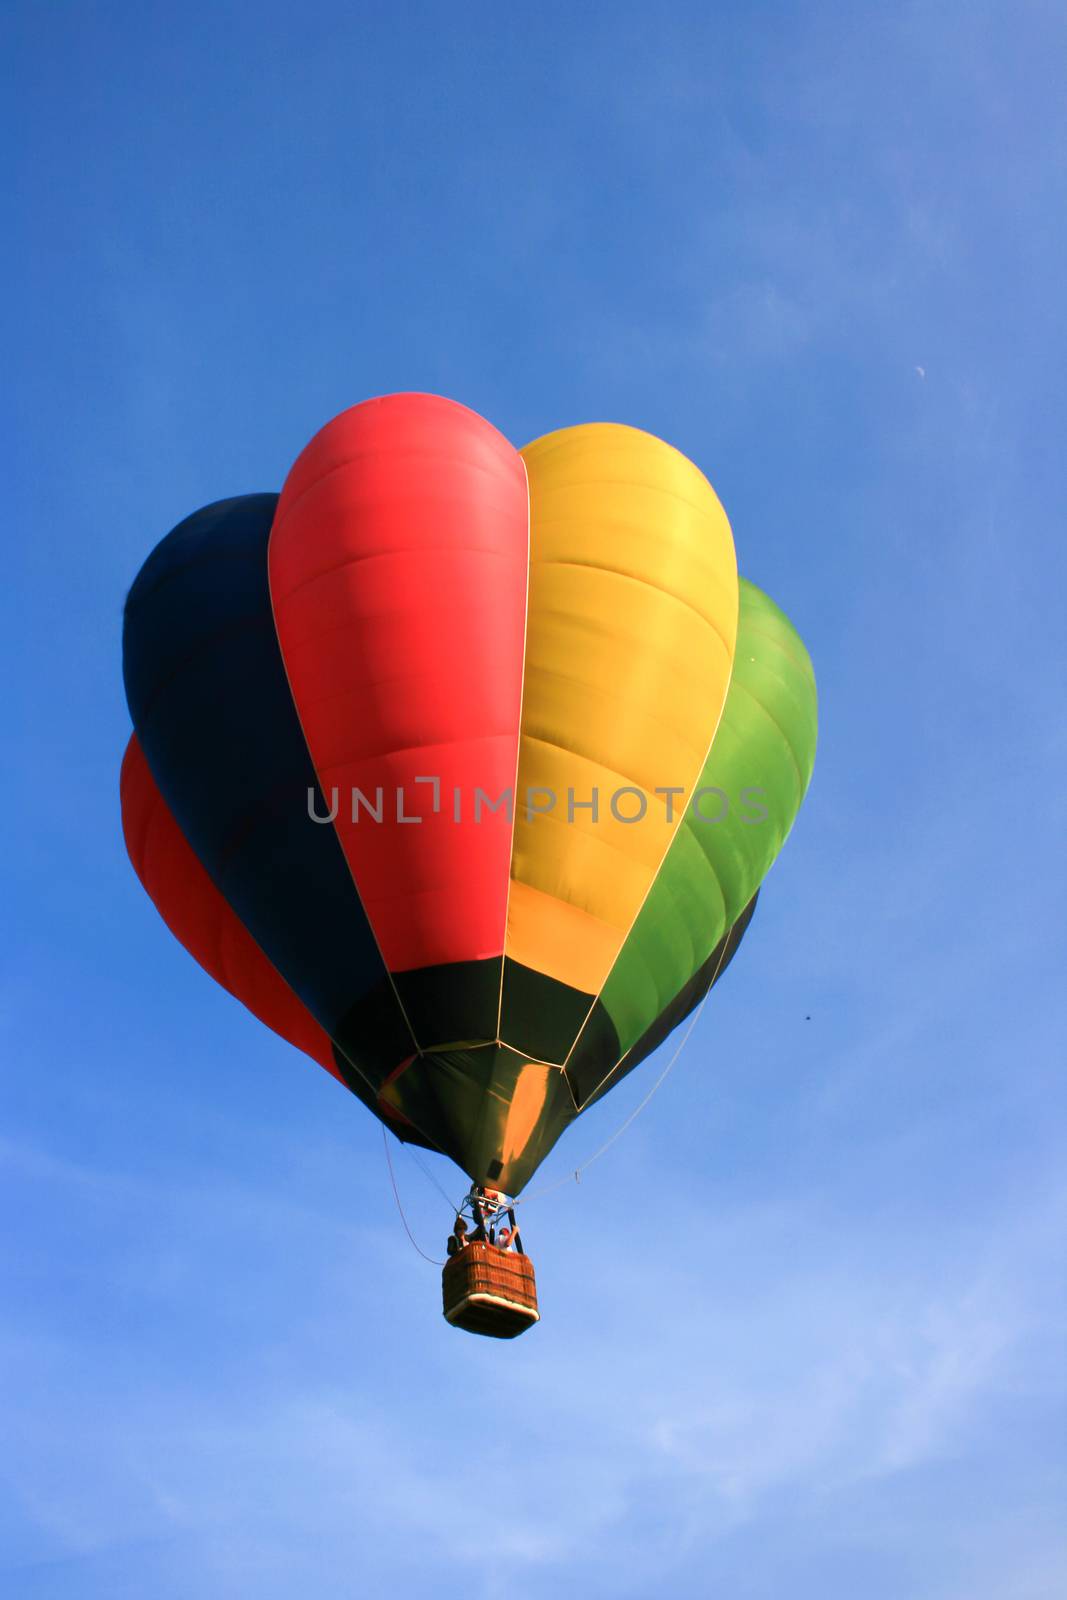 Colorful hot air balloon with blue sky background